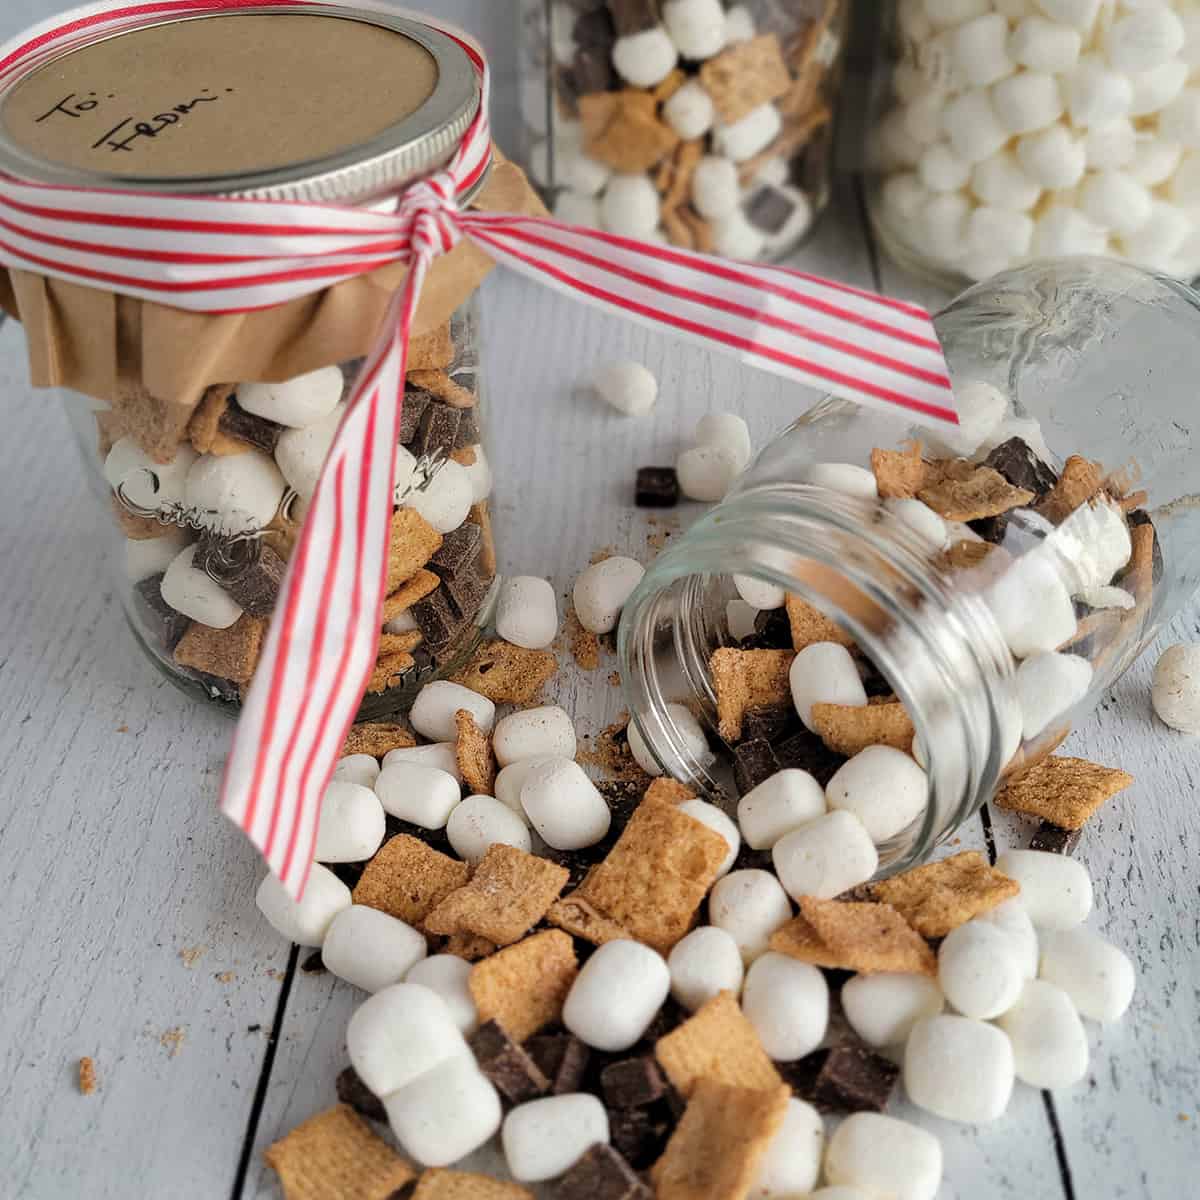 Cruncy S'more Mix in a gift jar and spilled out onto a tabletop.